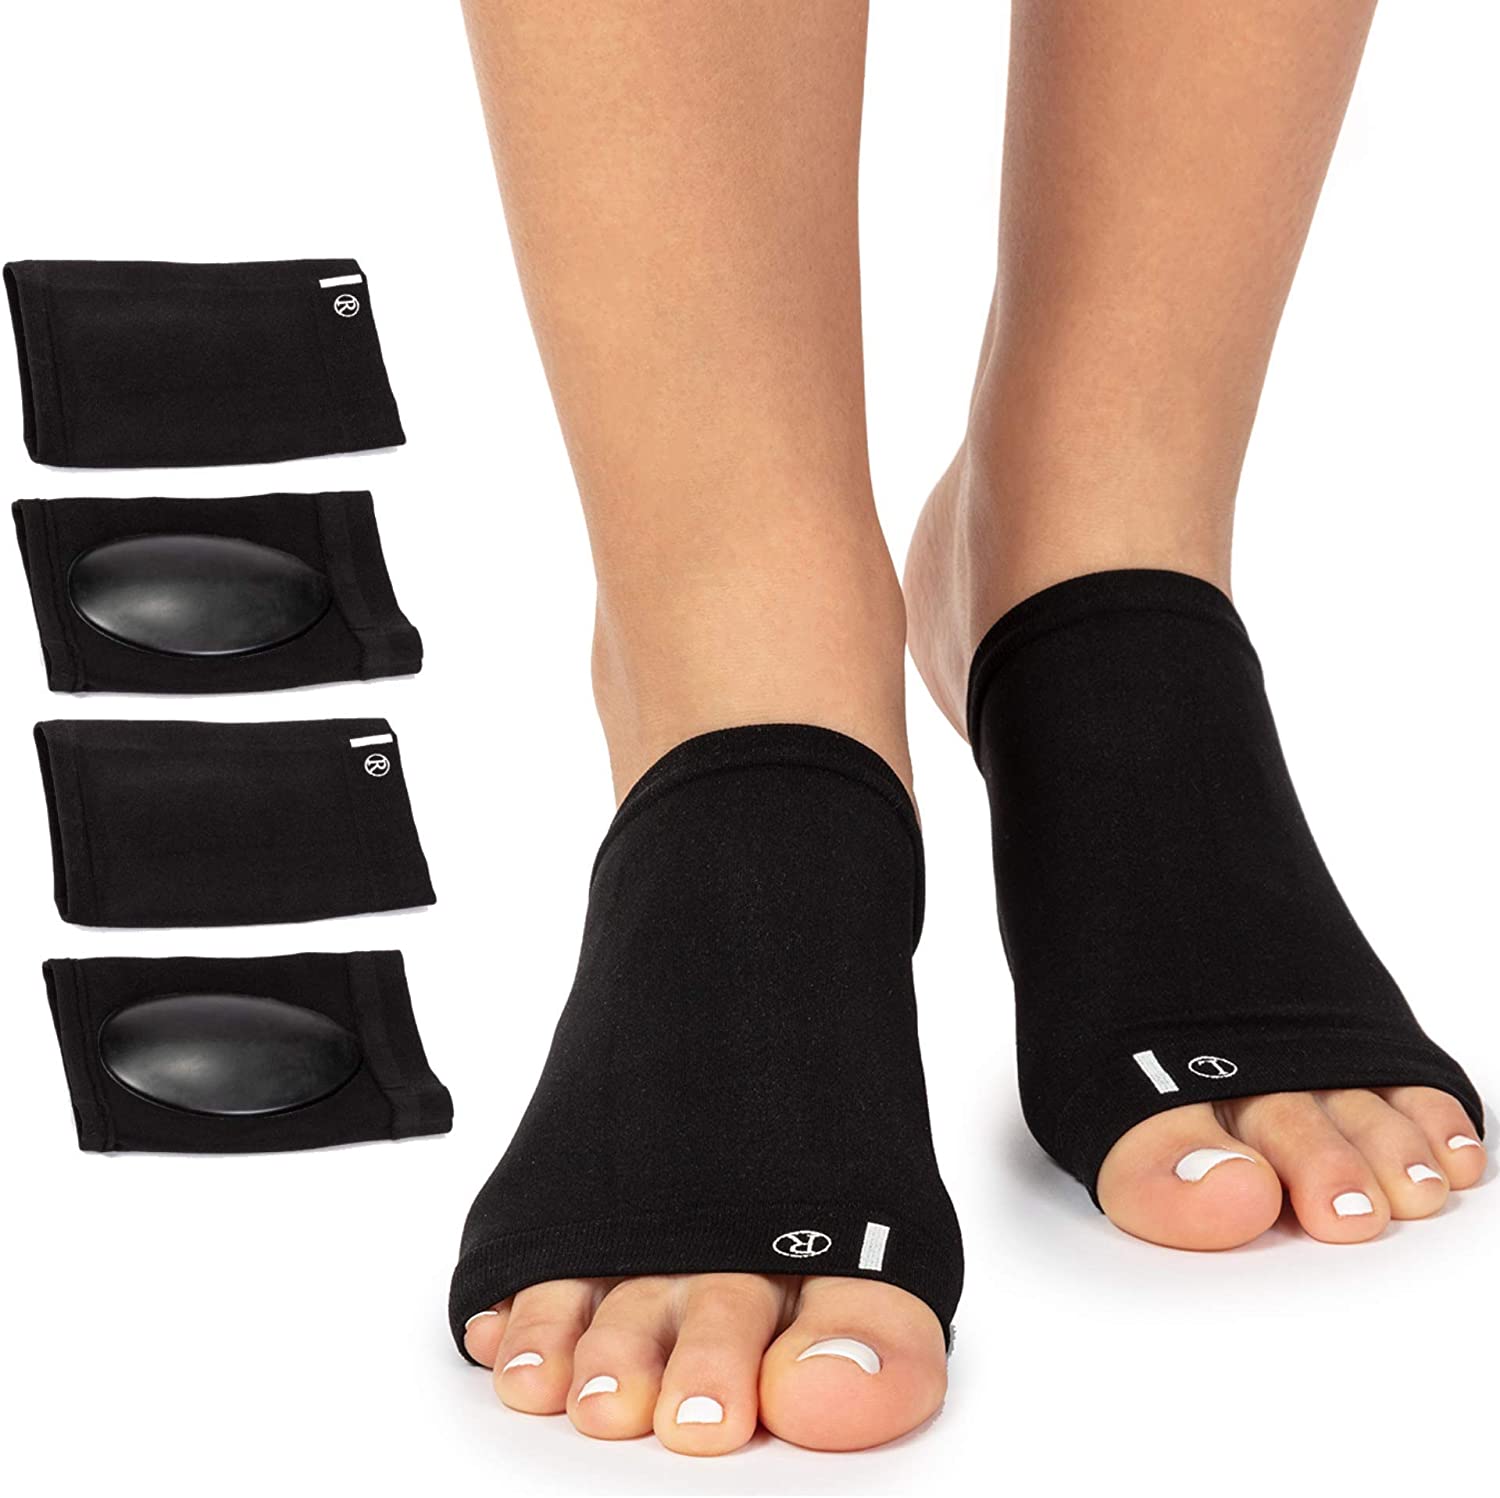 Review of Arch Support Brace for Flat Feet with Gel Pad Inside